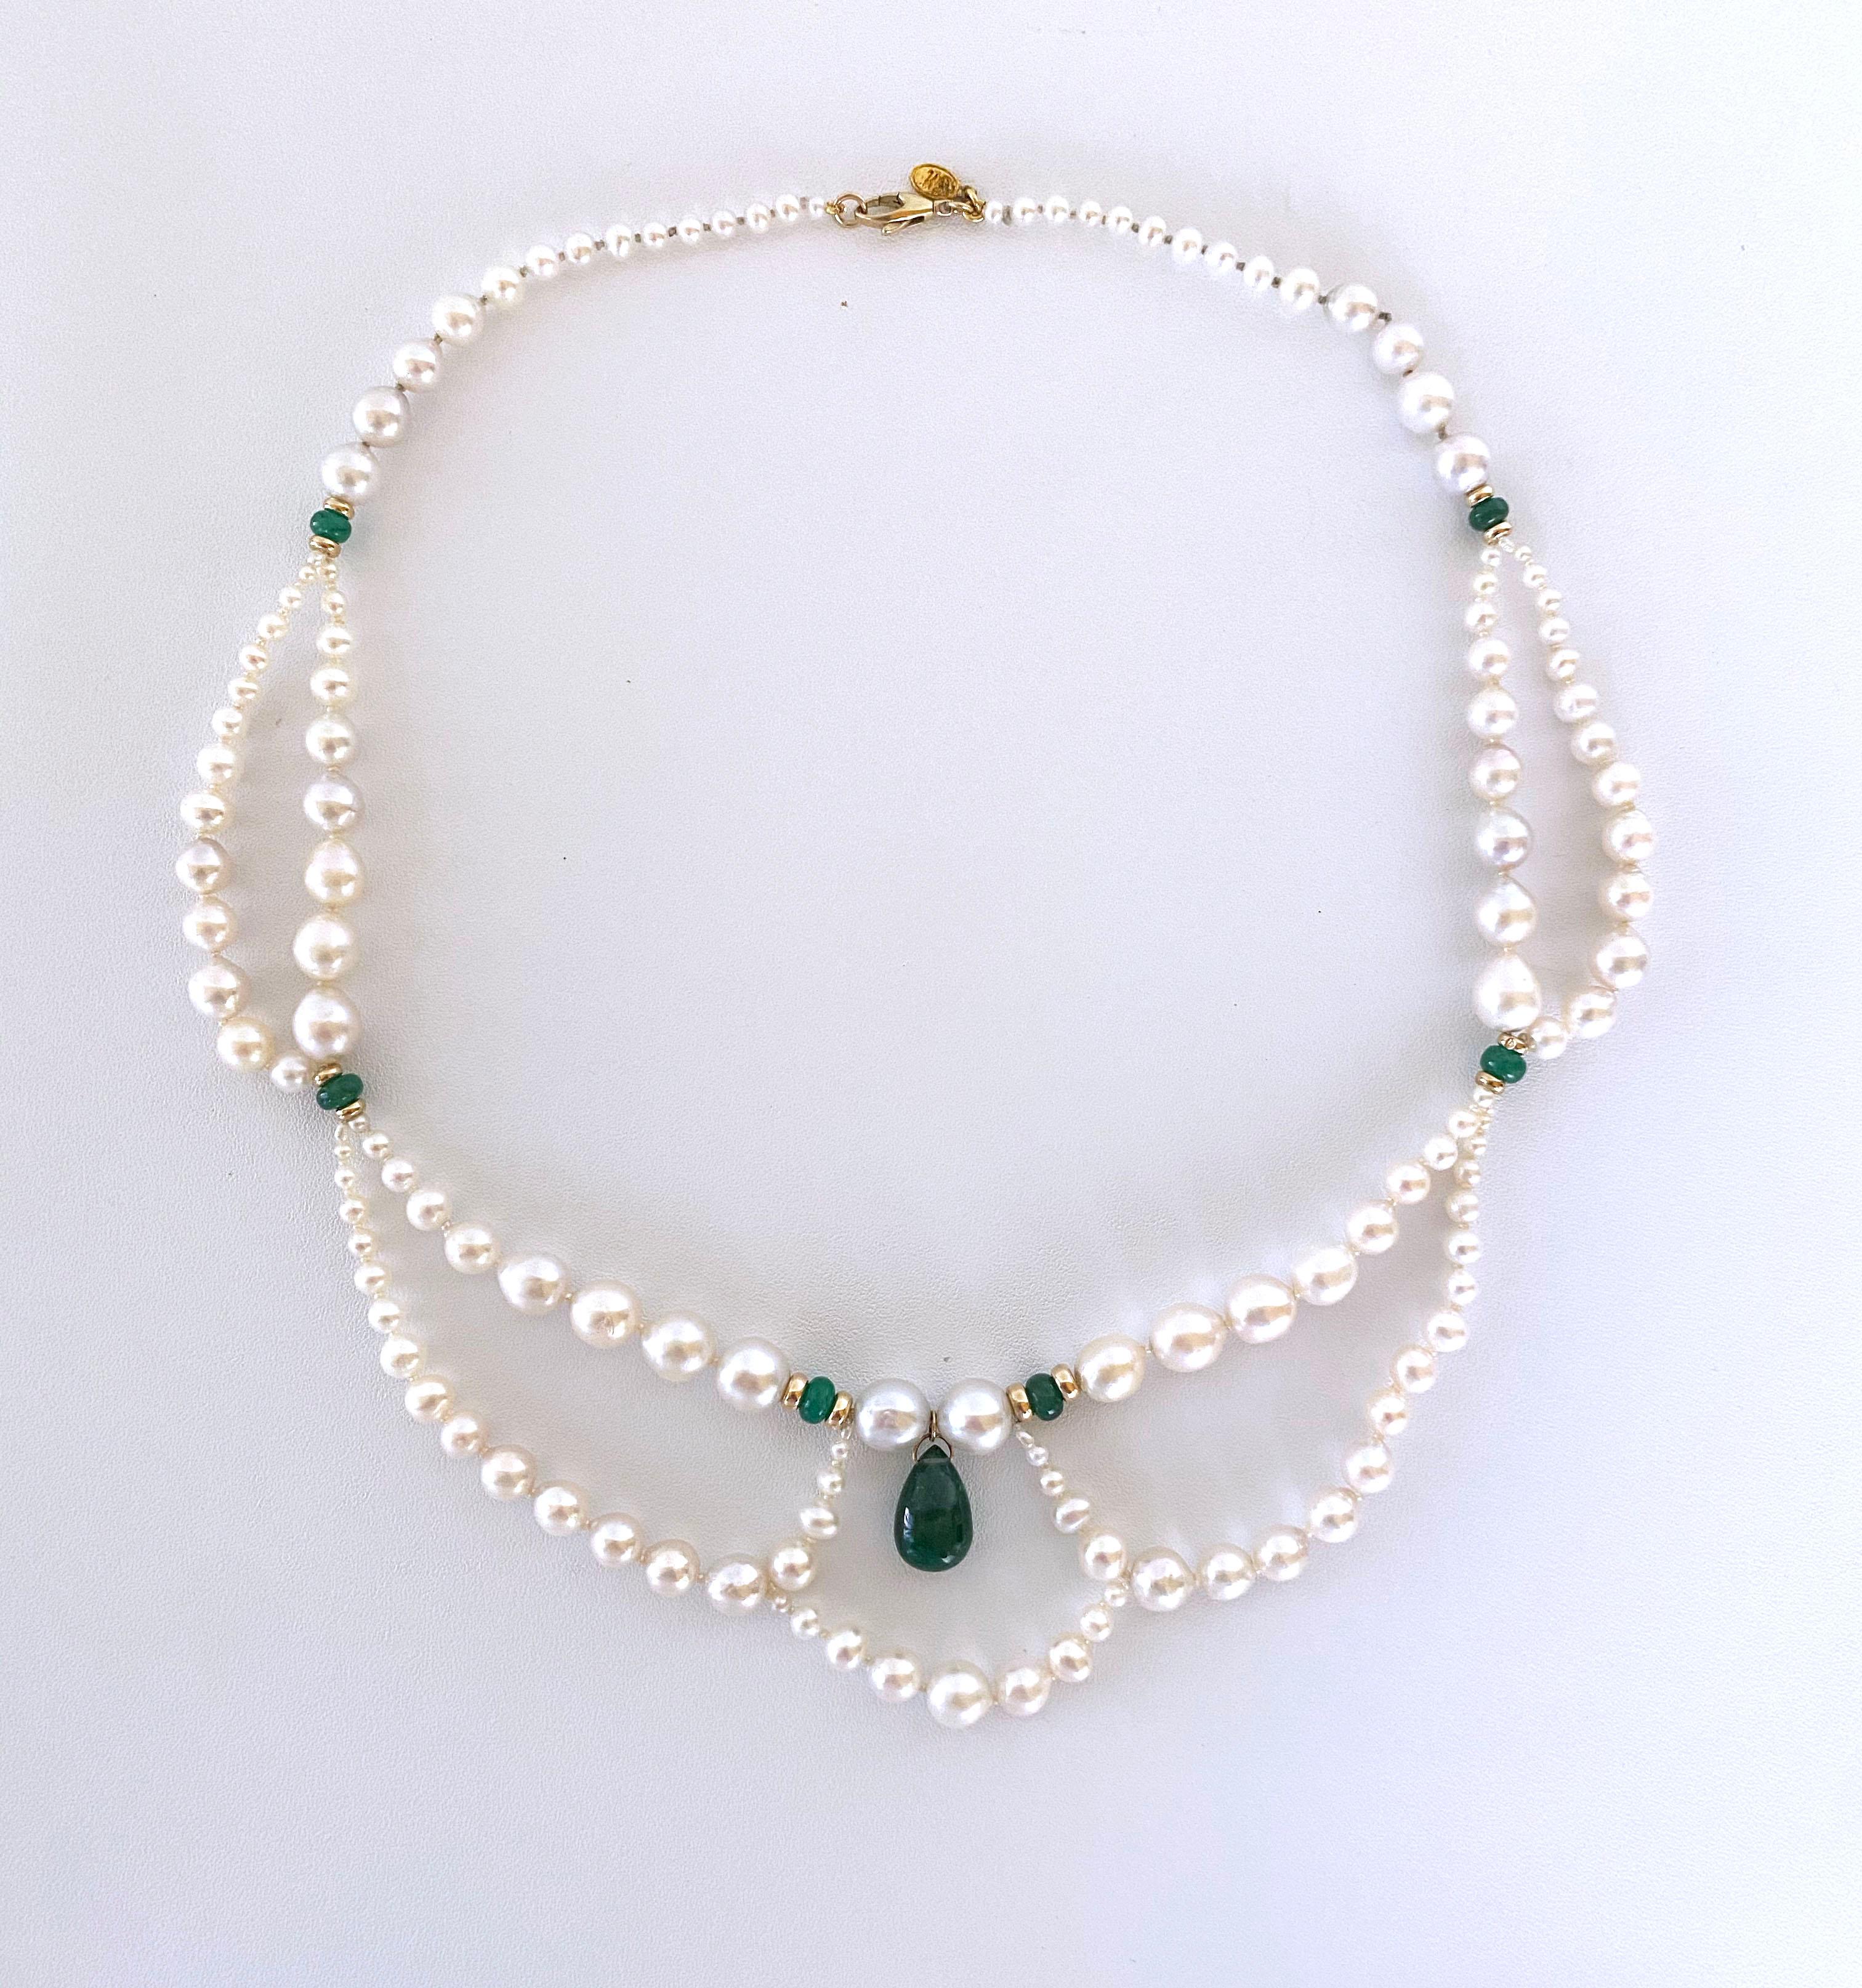 Classic Victorian inspired necklace all handmade by Marina J. This gorgeous piece features Graduated Drapes made with beautiful high luster white/cream Pearls, featuring a vibrant Emerald teardrop Centerpiece, all adorned with Emerald & 14K Yellow